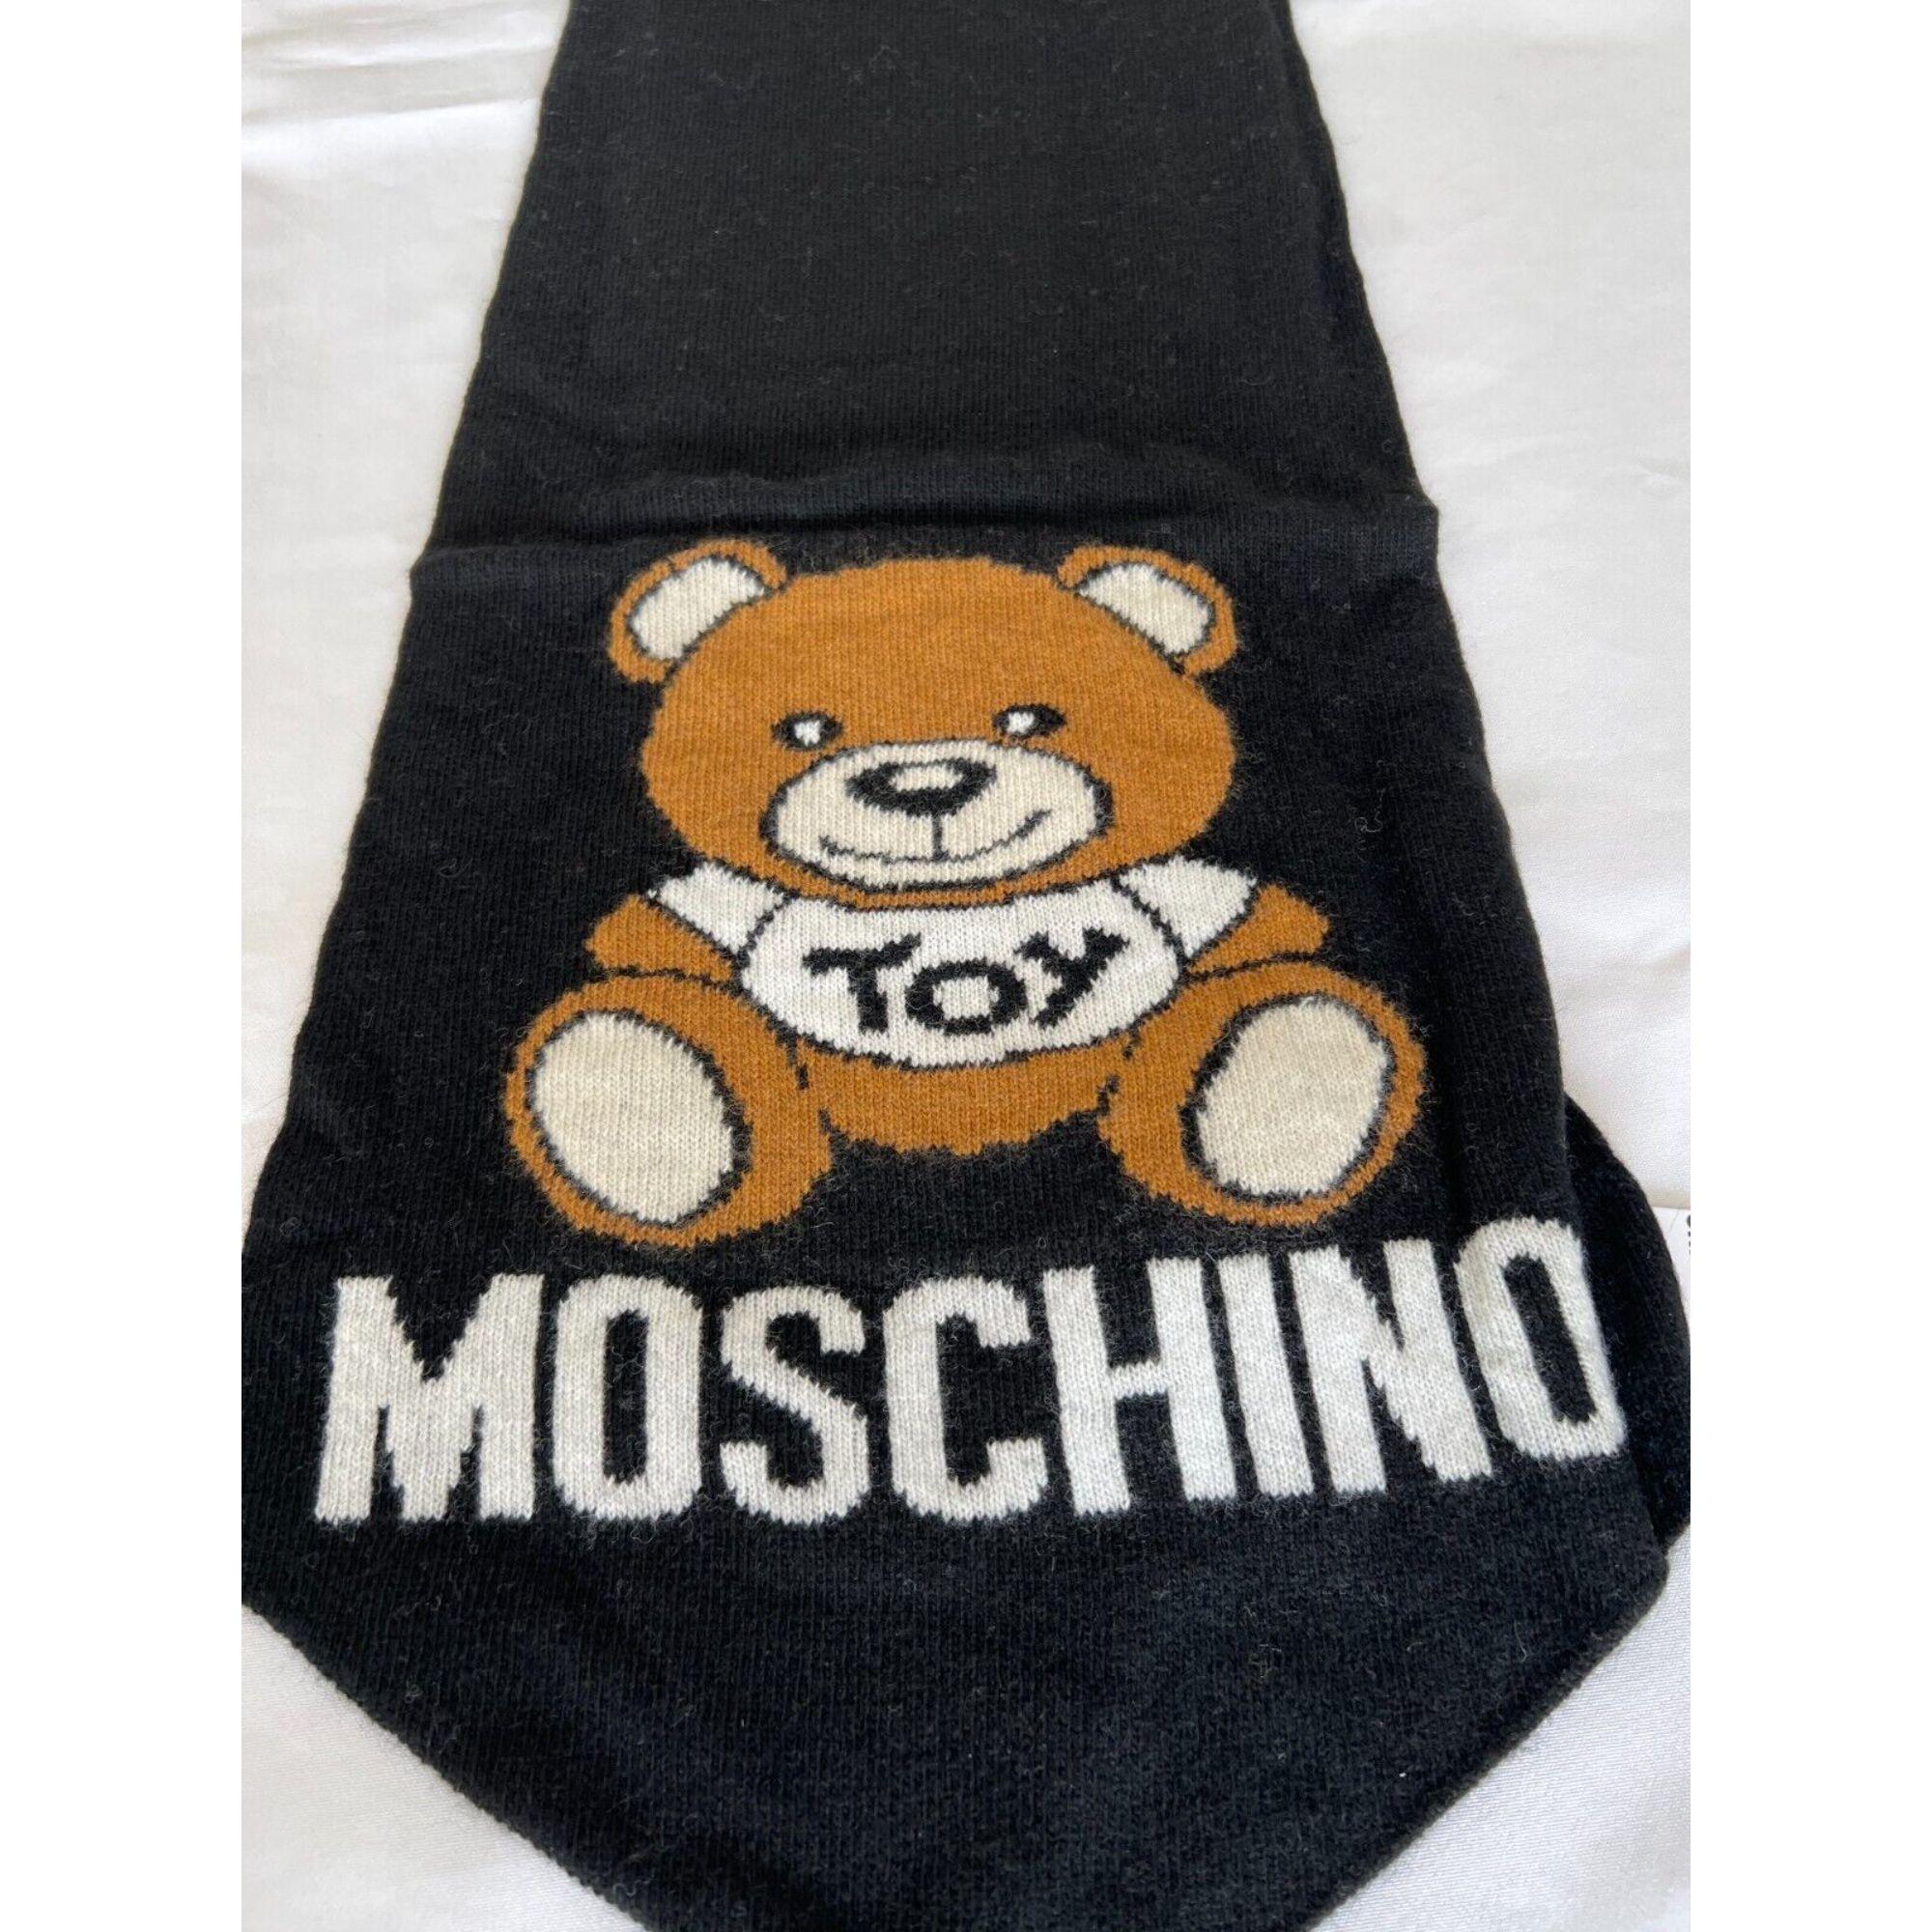 Moschino Couture Jeremy Scott Teddy Bear Black Scarf Tie Shaped 26X200cm 10.2x78

Additional Information:
Material: 35% PA 30% WO 30% VI
Color: Black
Style: Casual
Dimensions: 26X200cm or 10.2